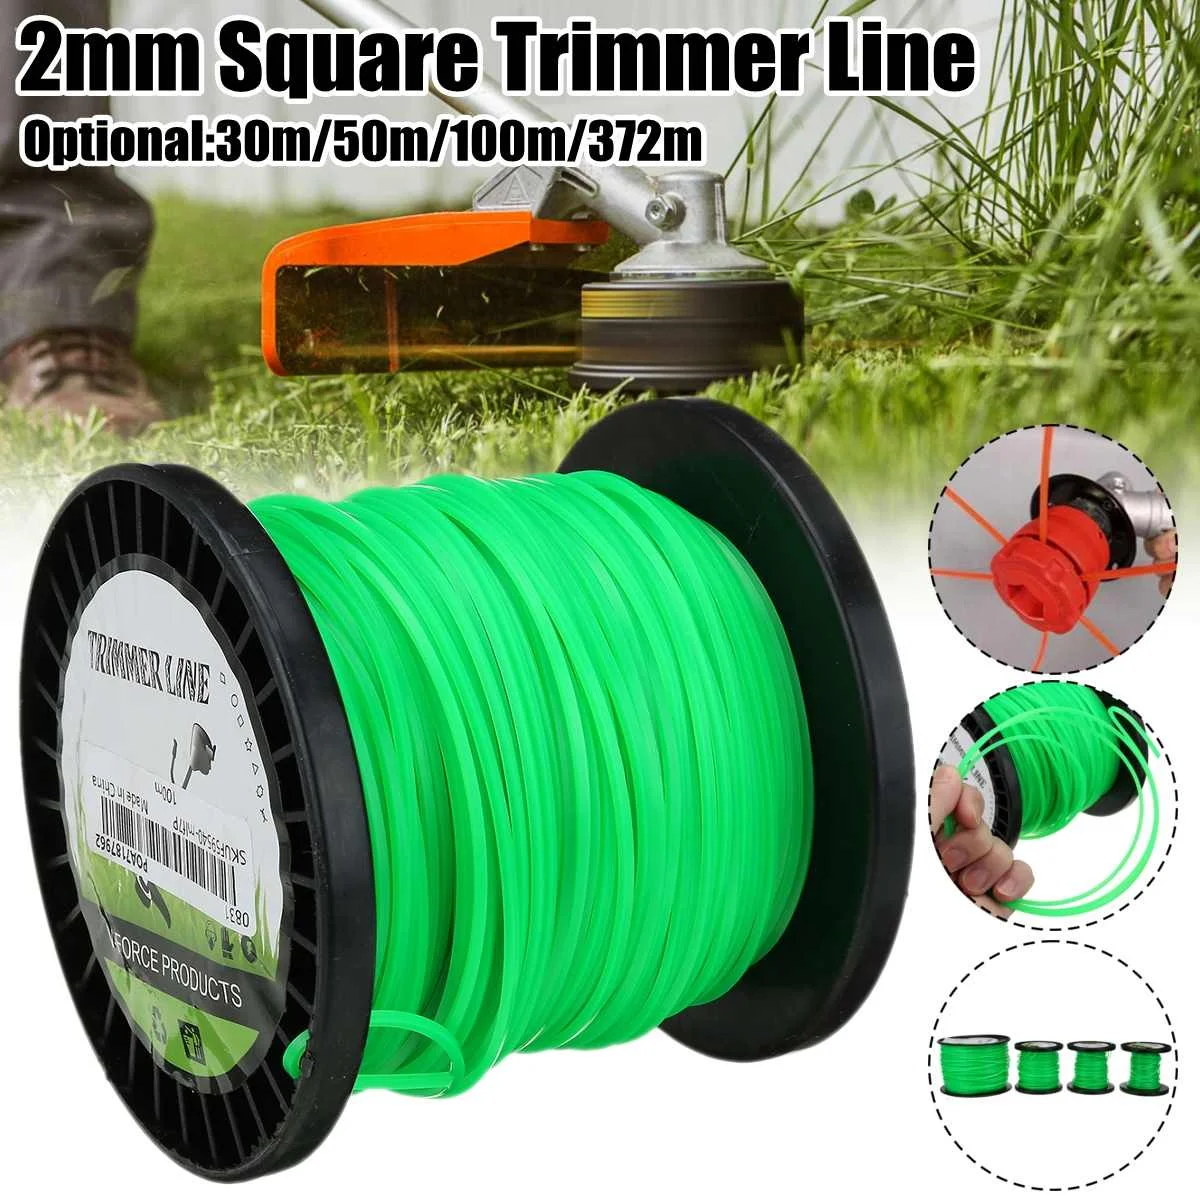 50m _WIRE CORD /// STAR STRIMMER LINE /// Petrol Strimmers /// HEAVY DUTY_ Ø 2mm 